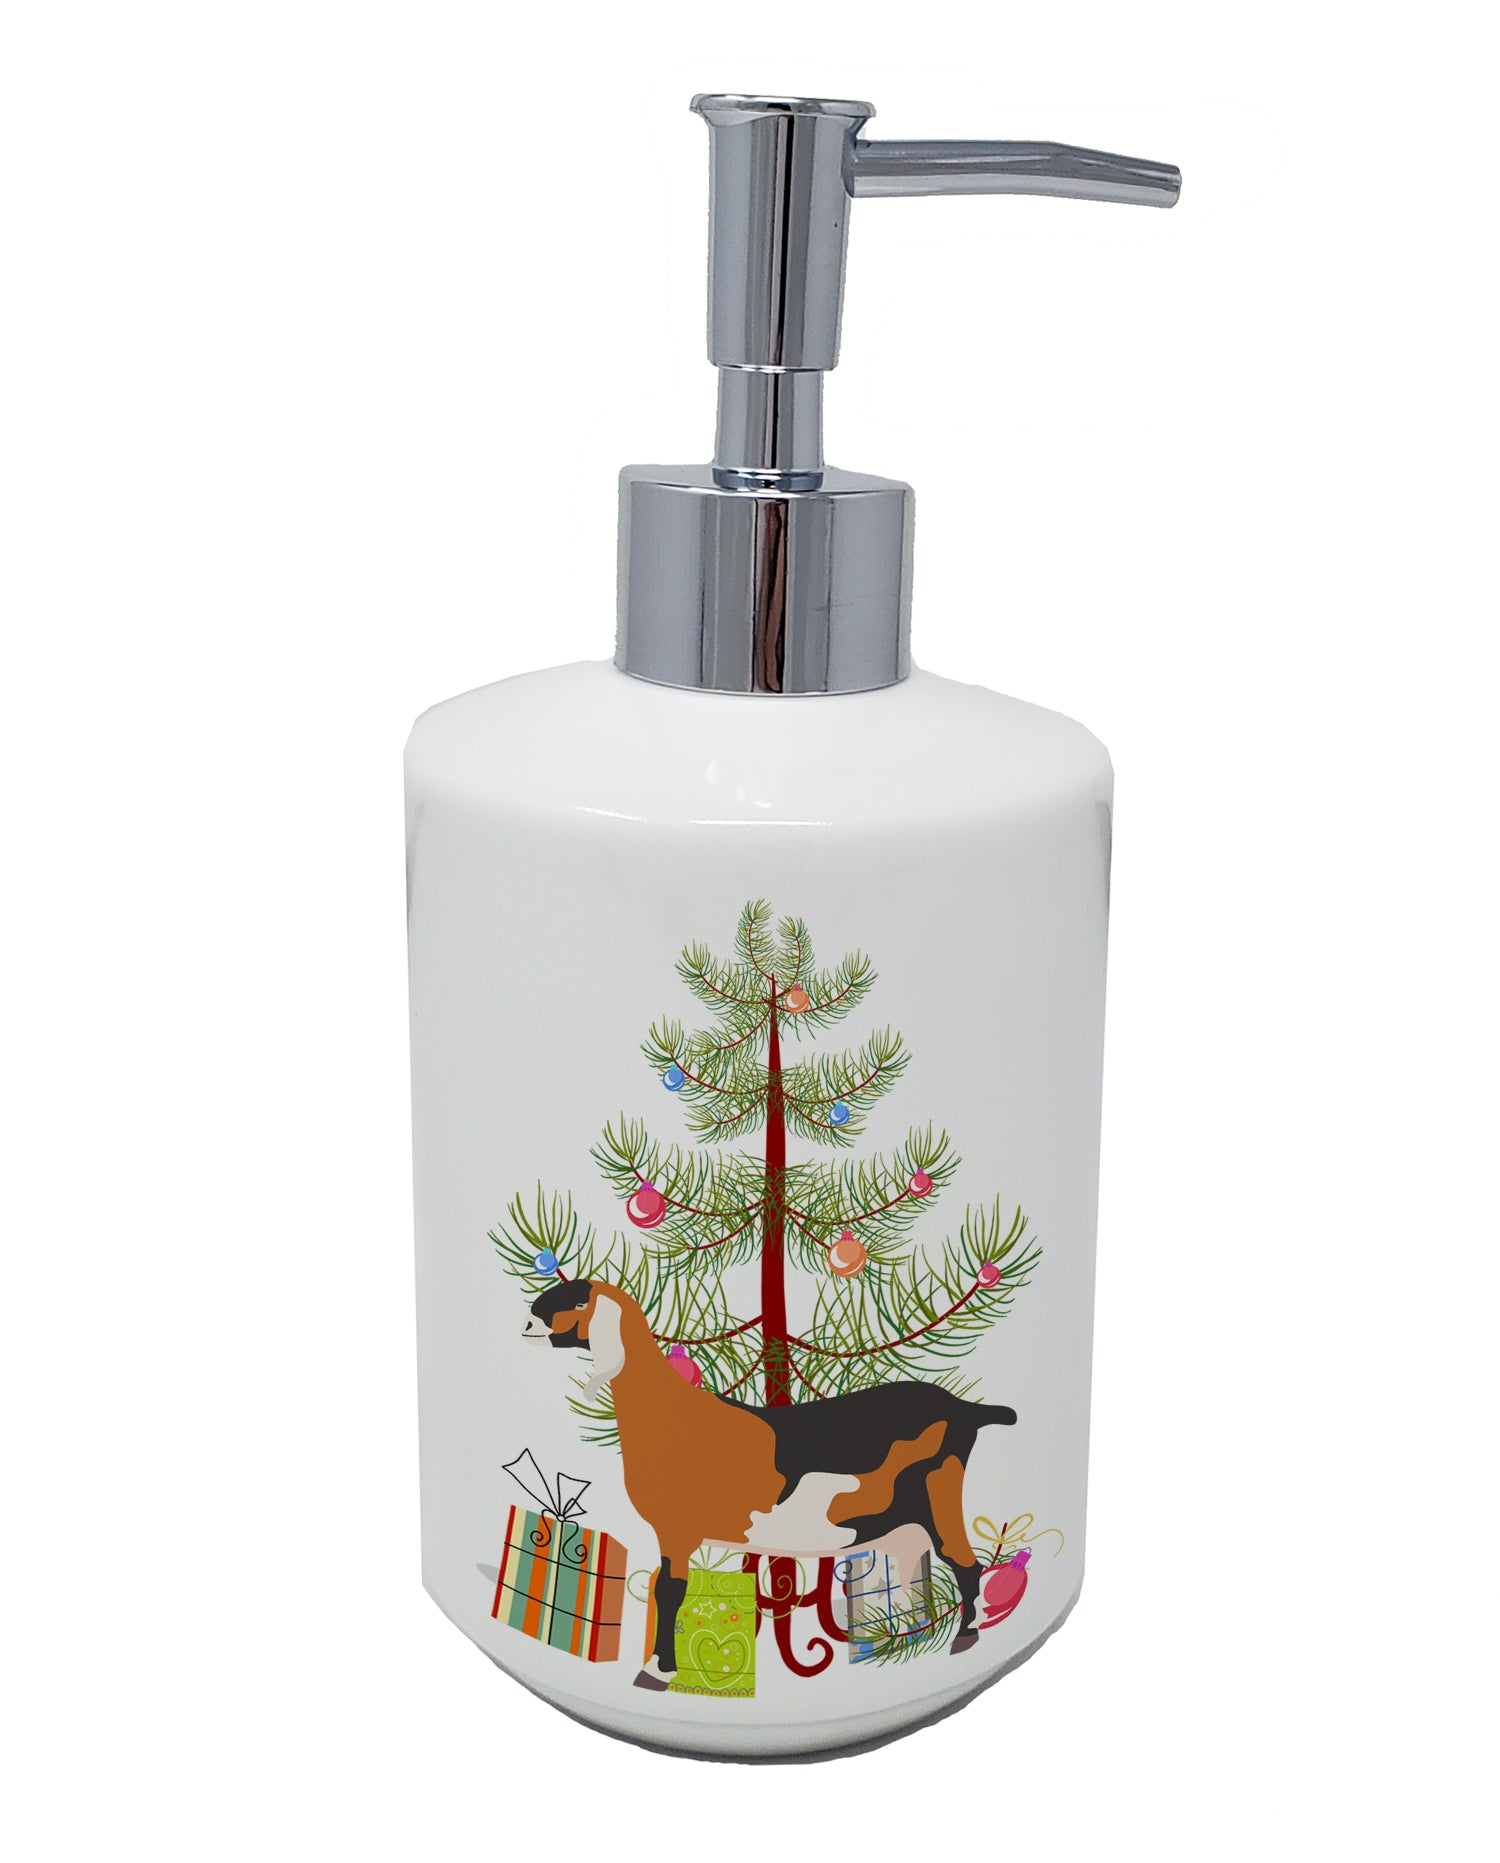 Buy this Anglo-nubian Nubian Goat Christmas Ceramic Soap Dispenser